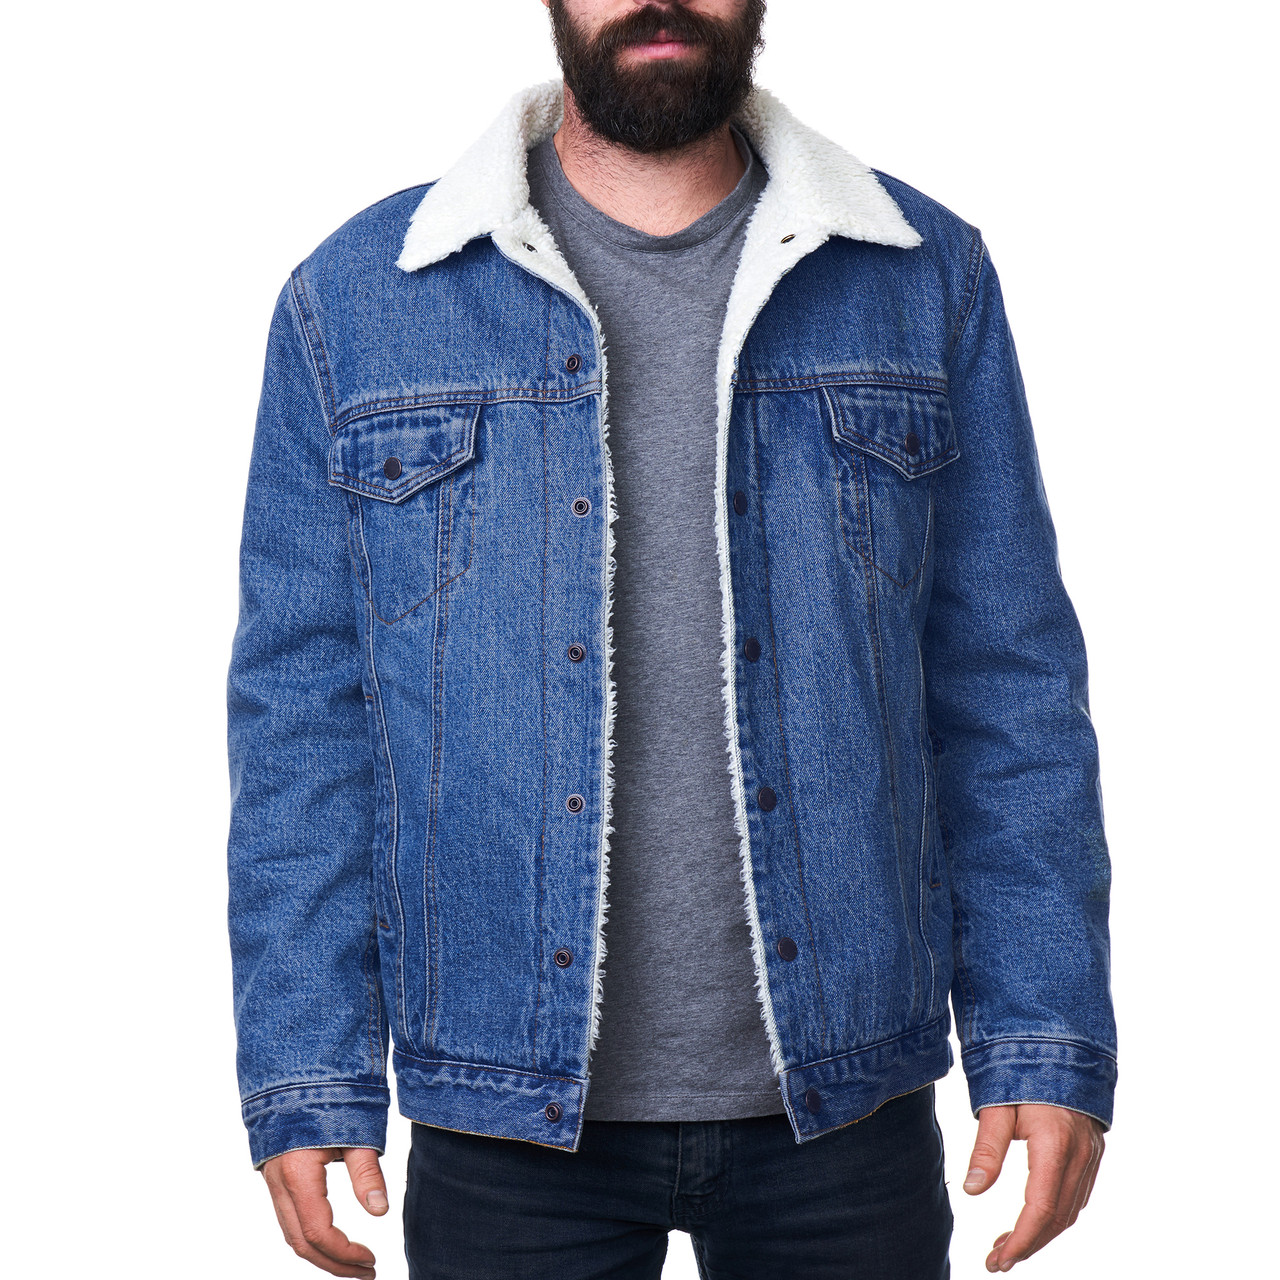 jean jacket lined with sherpa